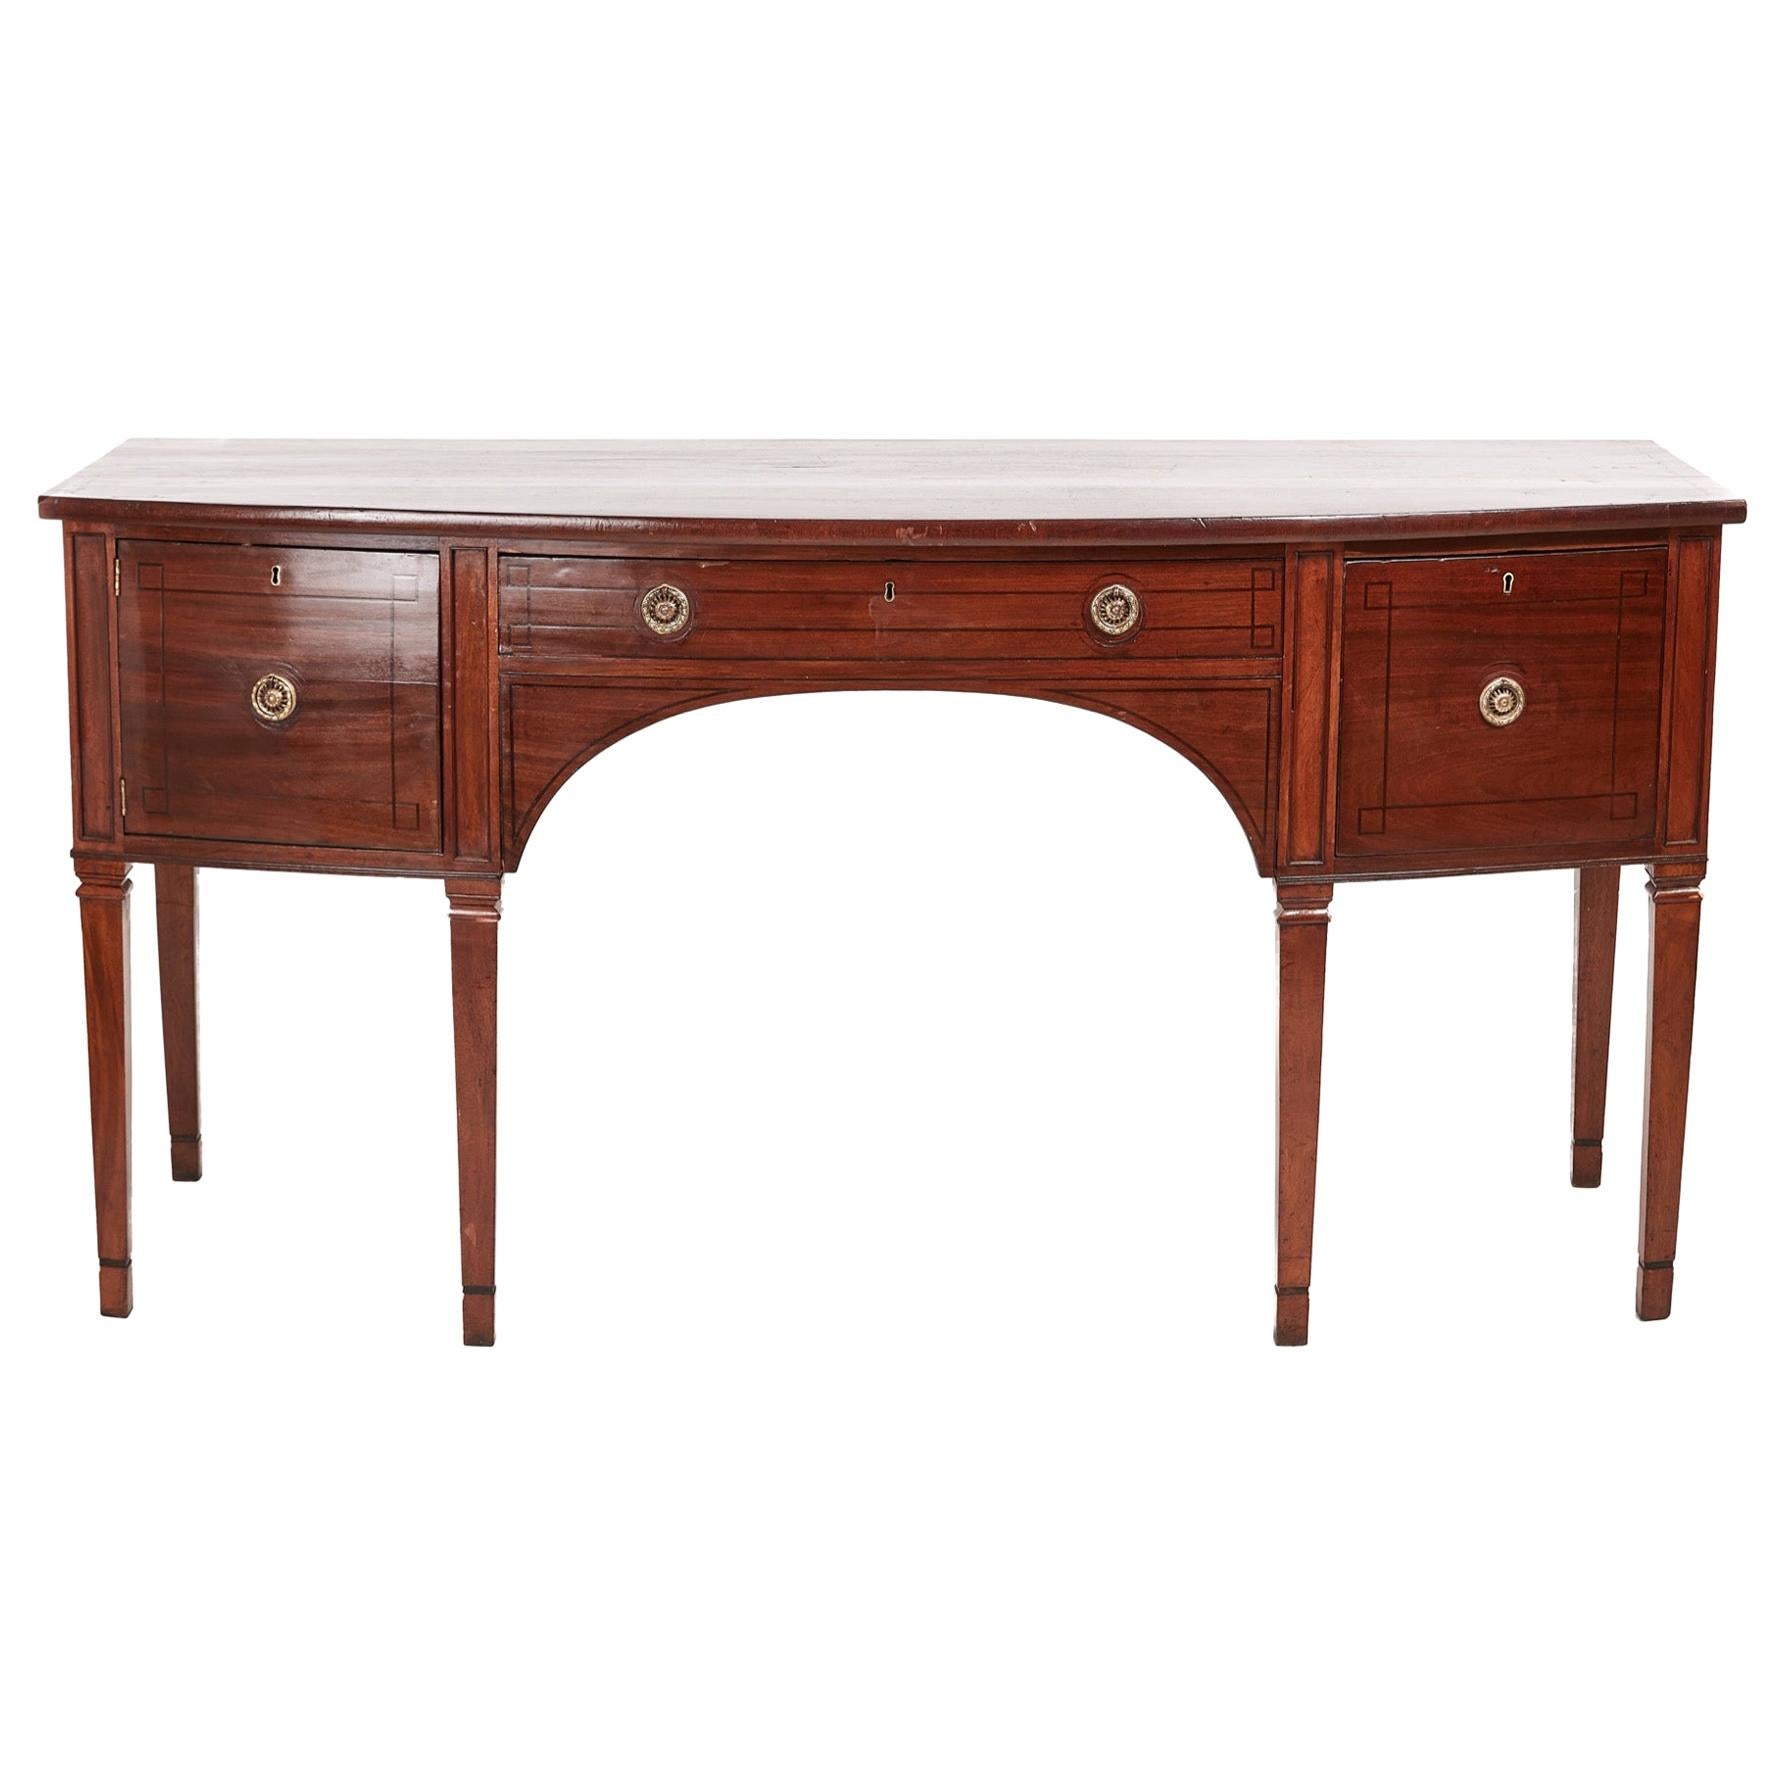 Antique George III Mahogany Bow Front Sideboard